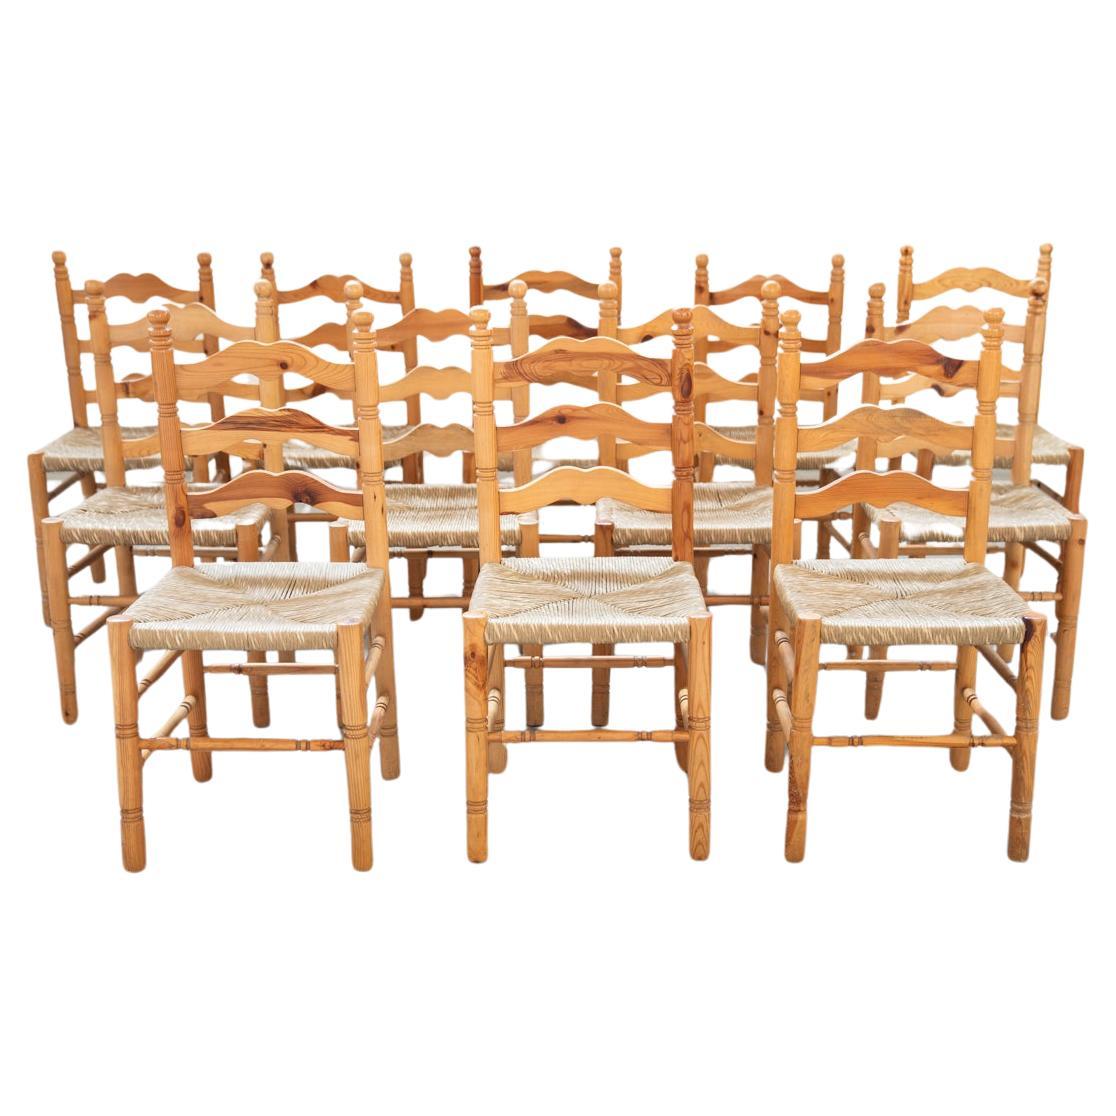 Friulian rustic chairs with turned legs, set of 12, 1980-1990